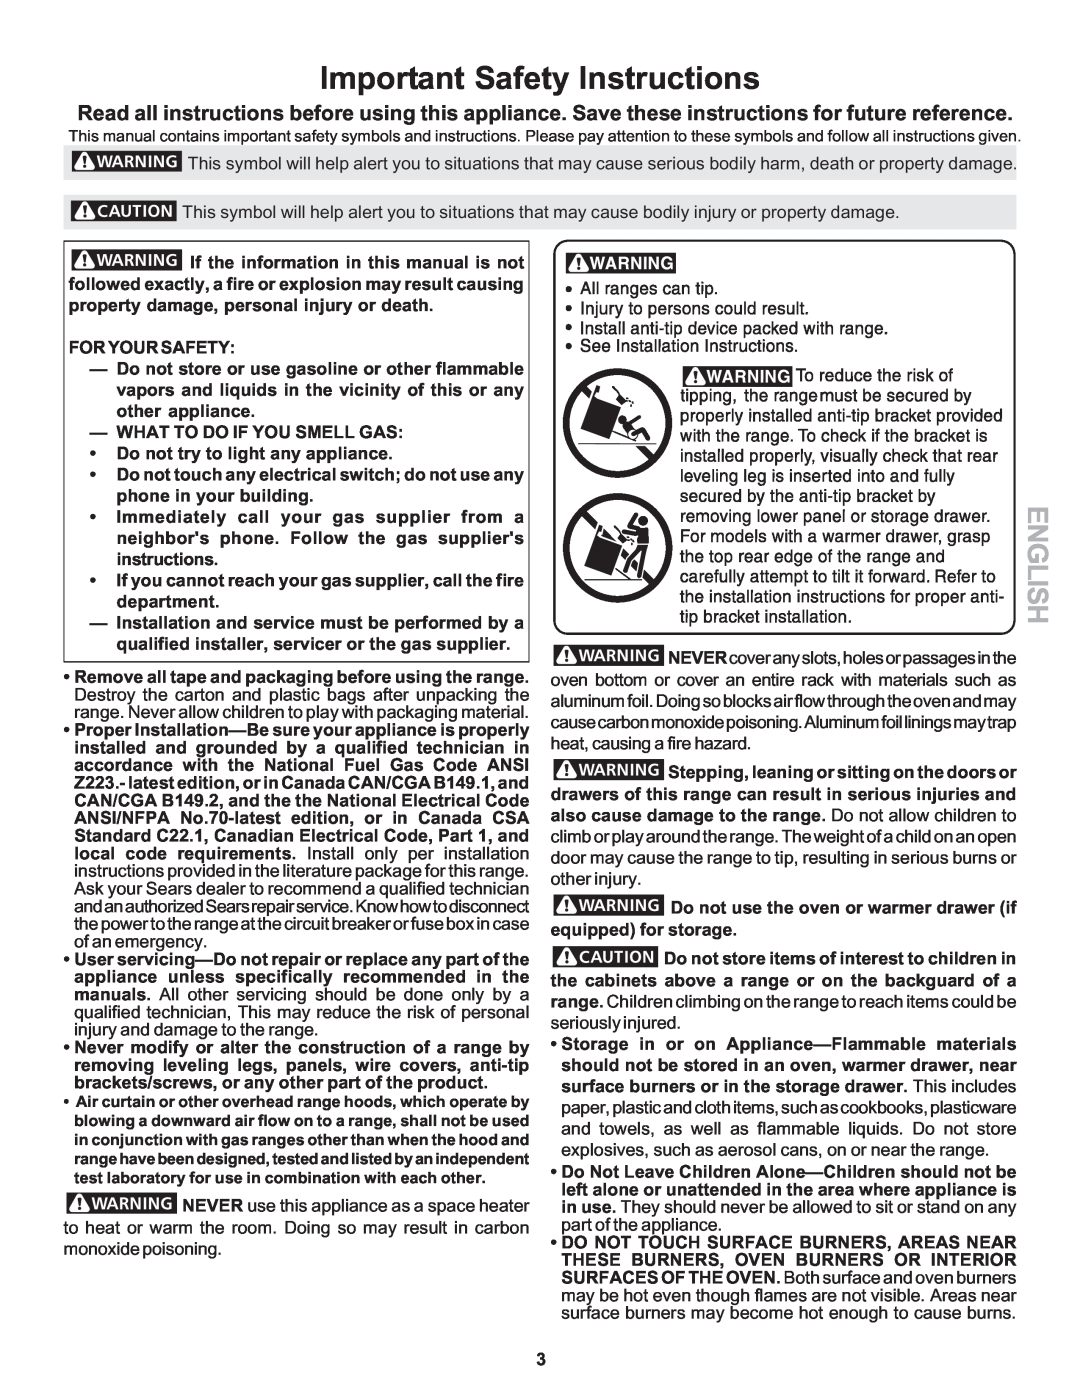 Kenmore 790 manual Important Safety Instructions, English, For Your Safety 